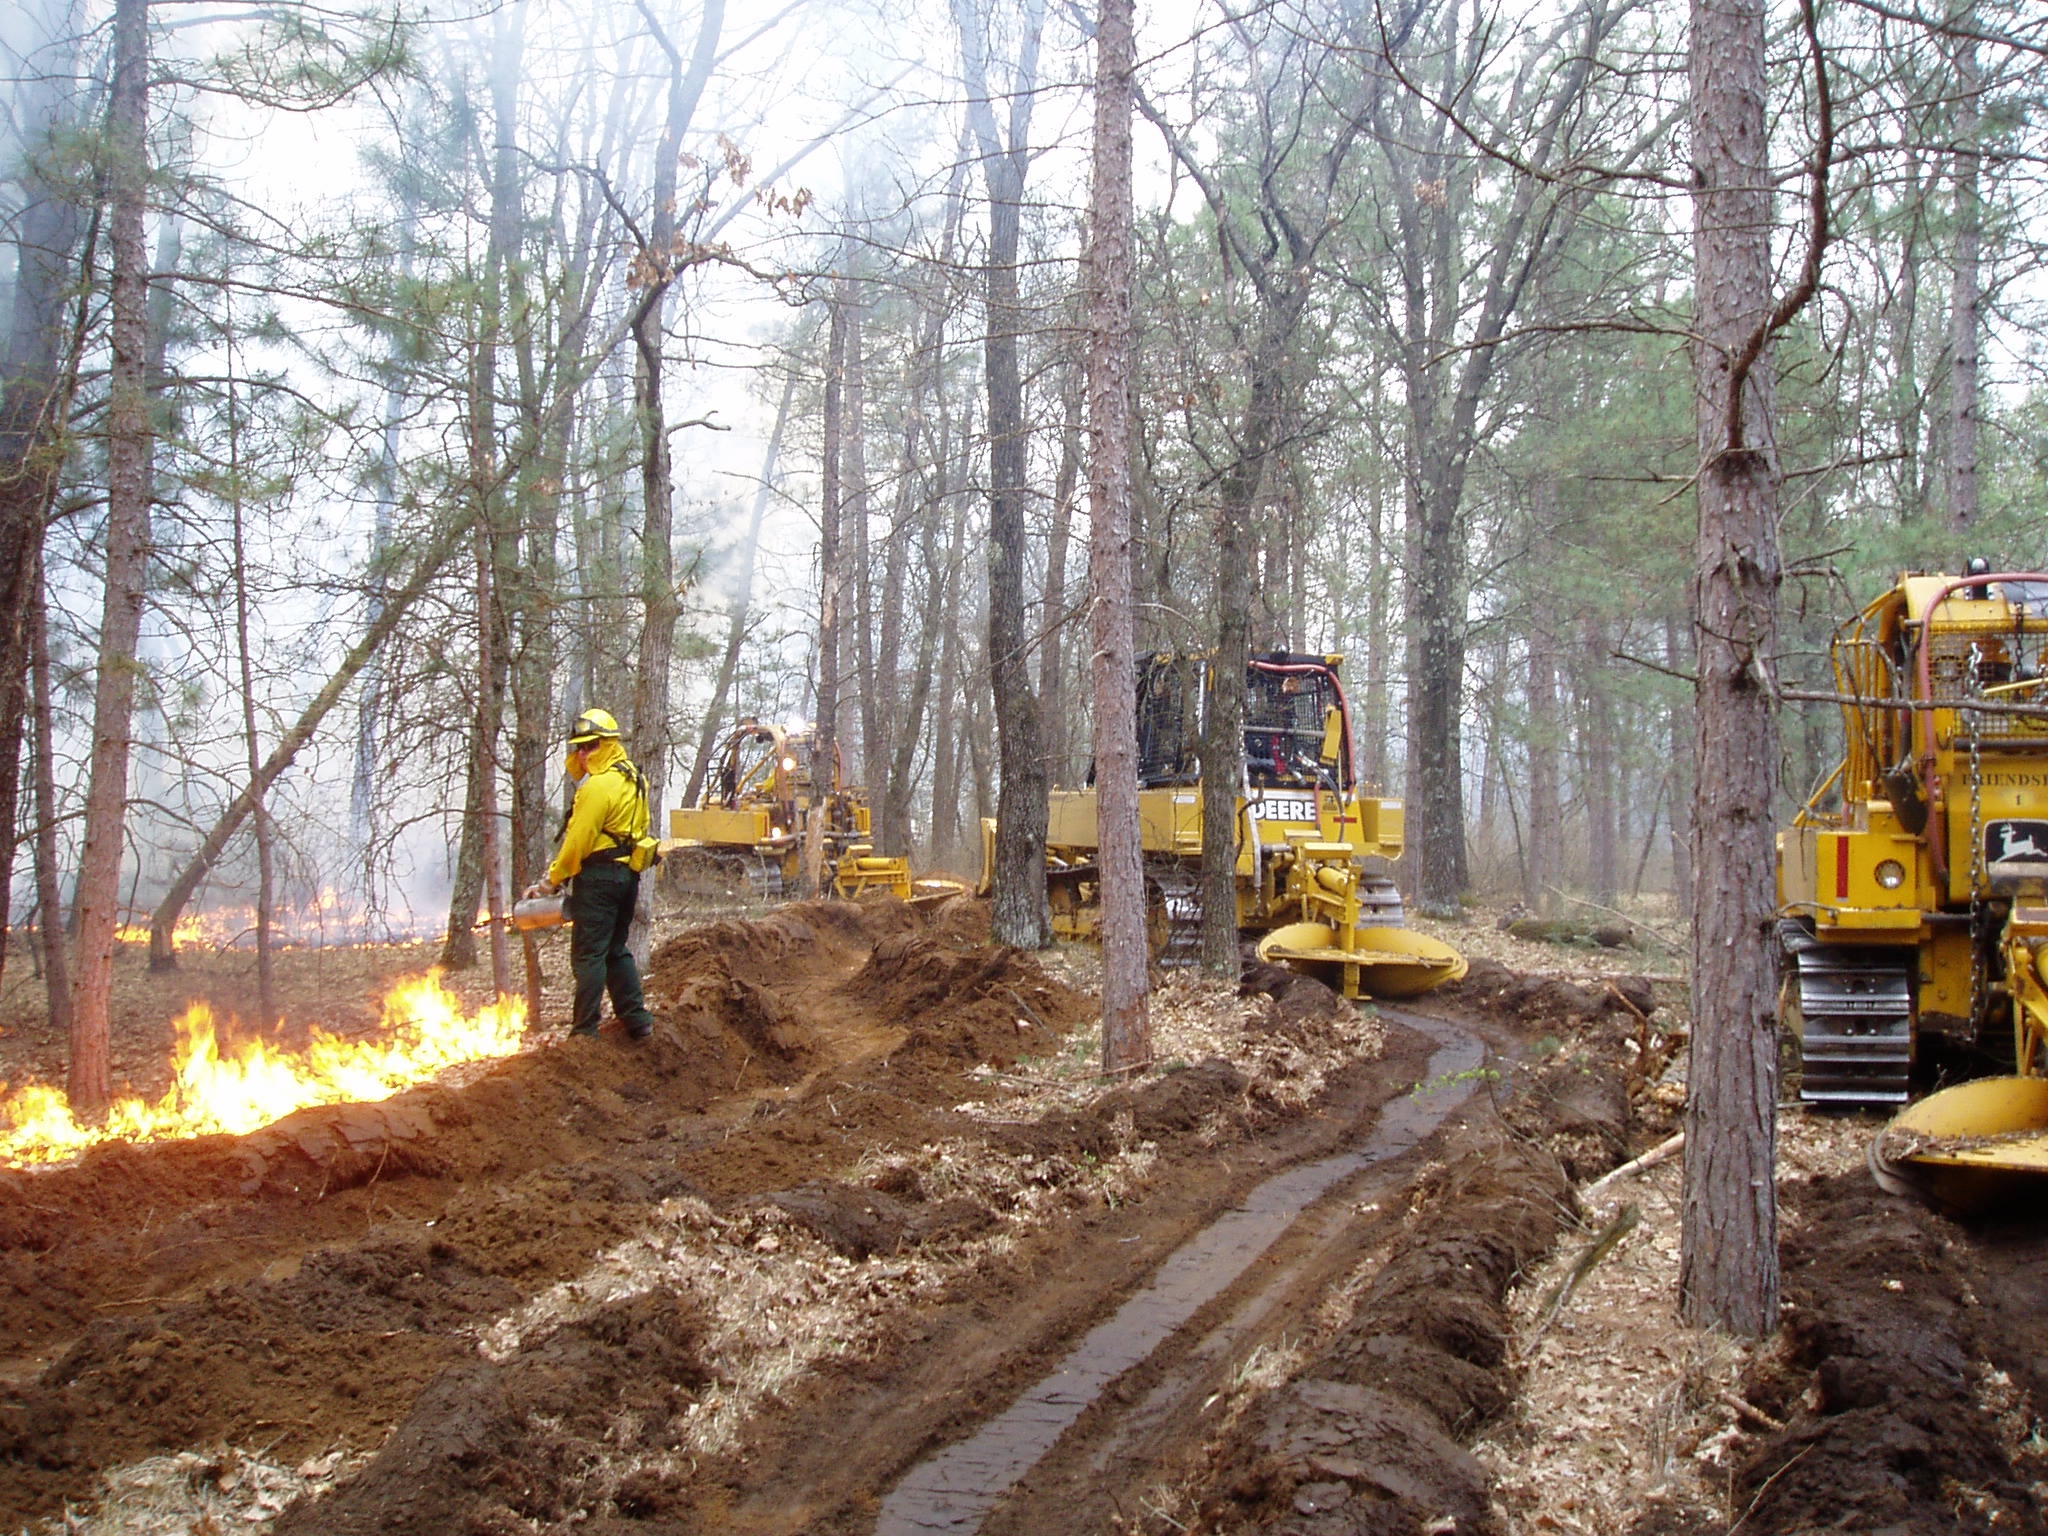 Tractor-plows digging furrows to contain a wildfire